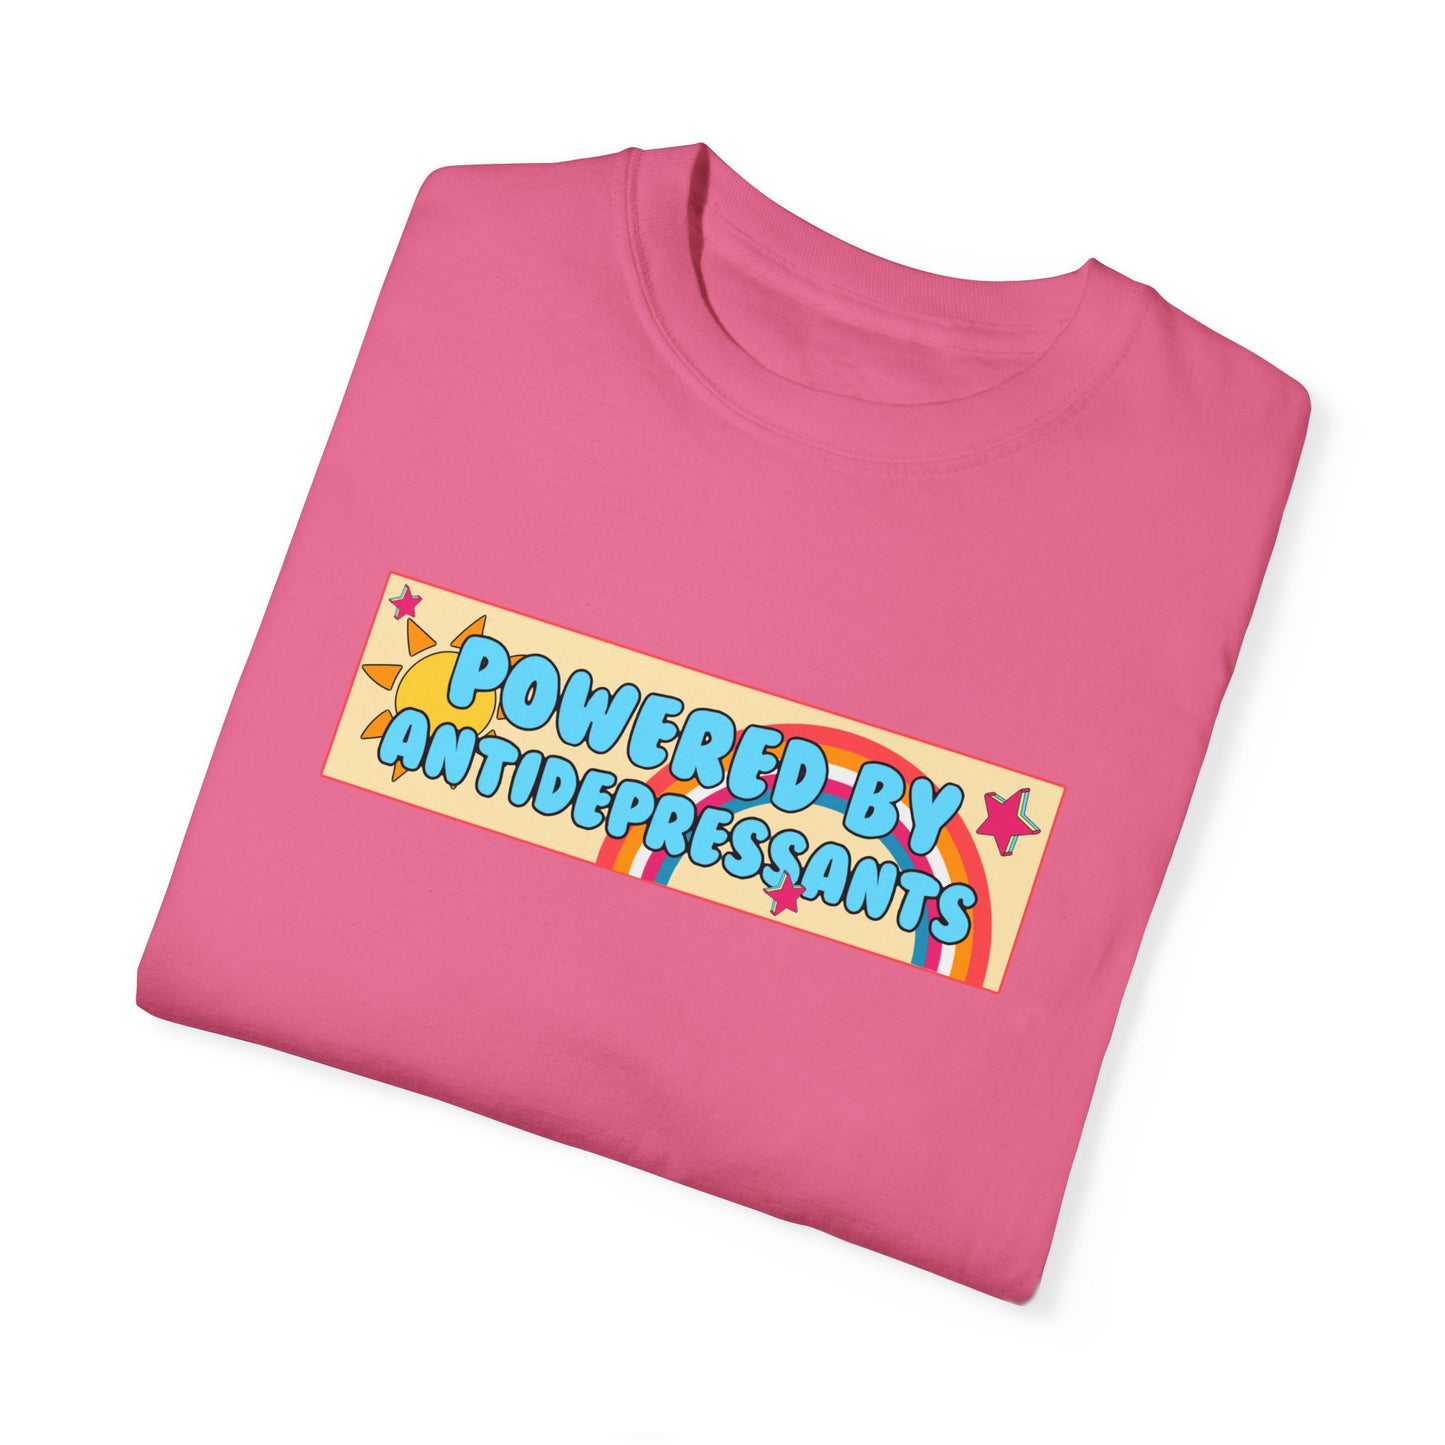 Powered By Antidepressants Comfort Colors Tshirt